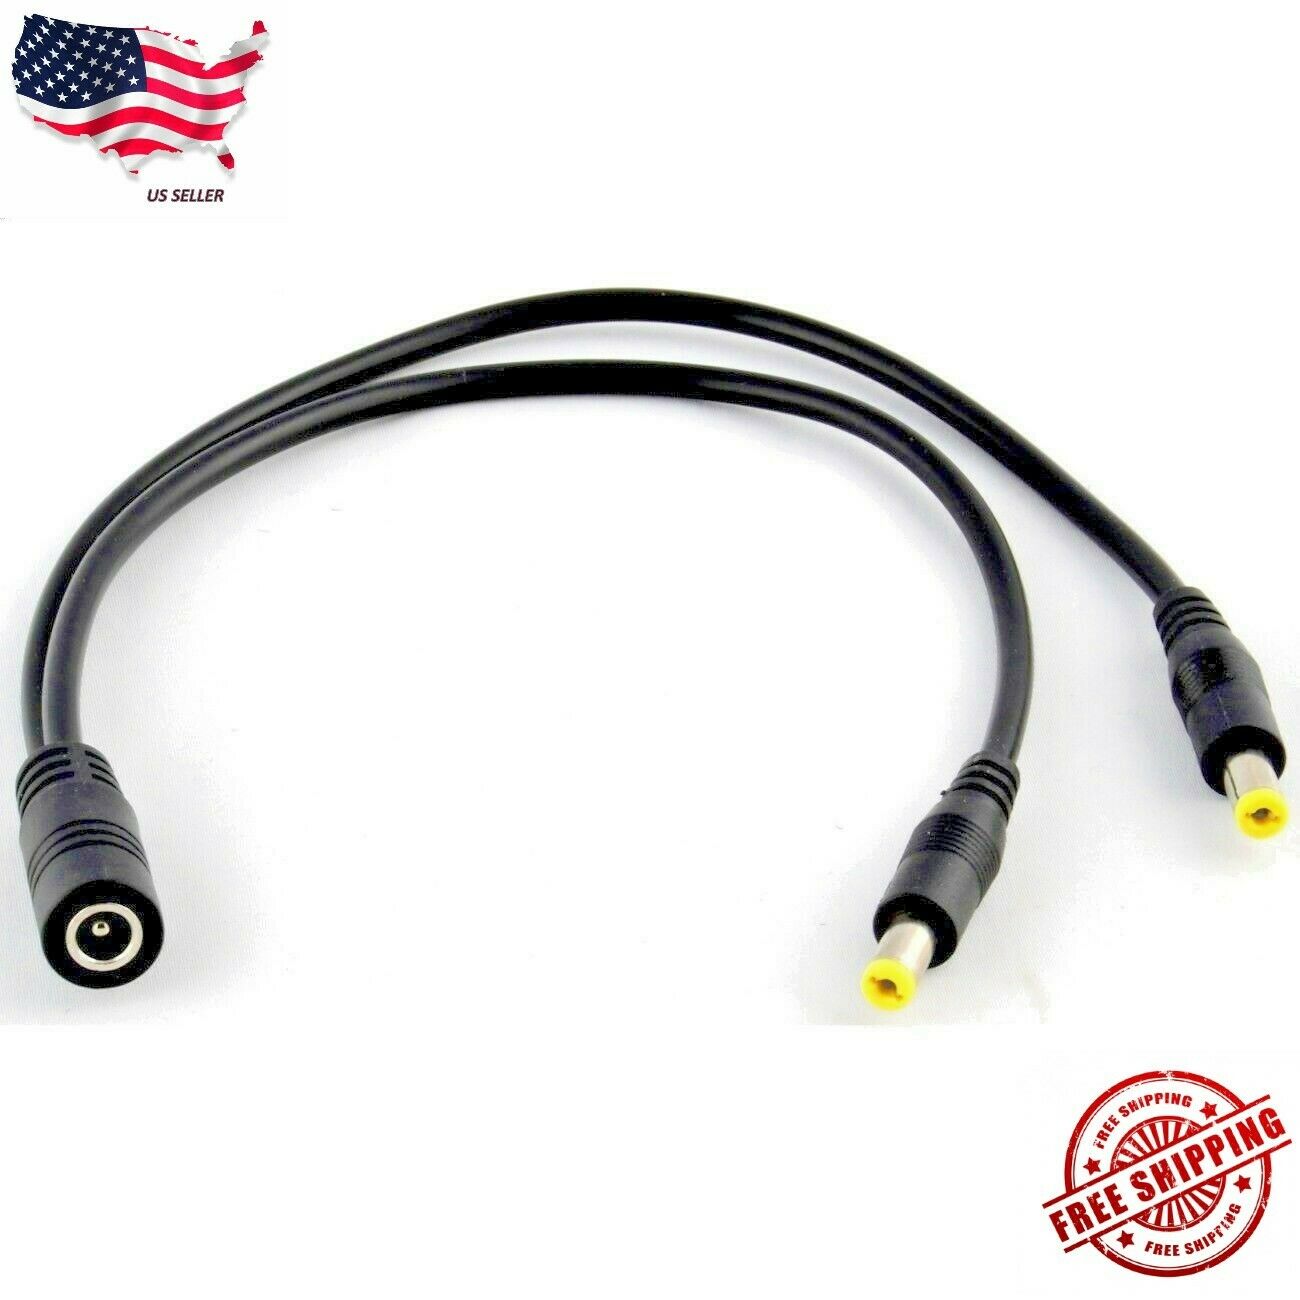 DC Power Splitter Cable Cord Adapter 1 Female to 2 Male CCTV Security Camera DVR Cable Length: 30cm UPC: 0845832015